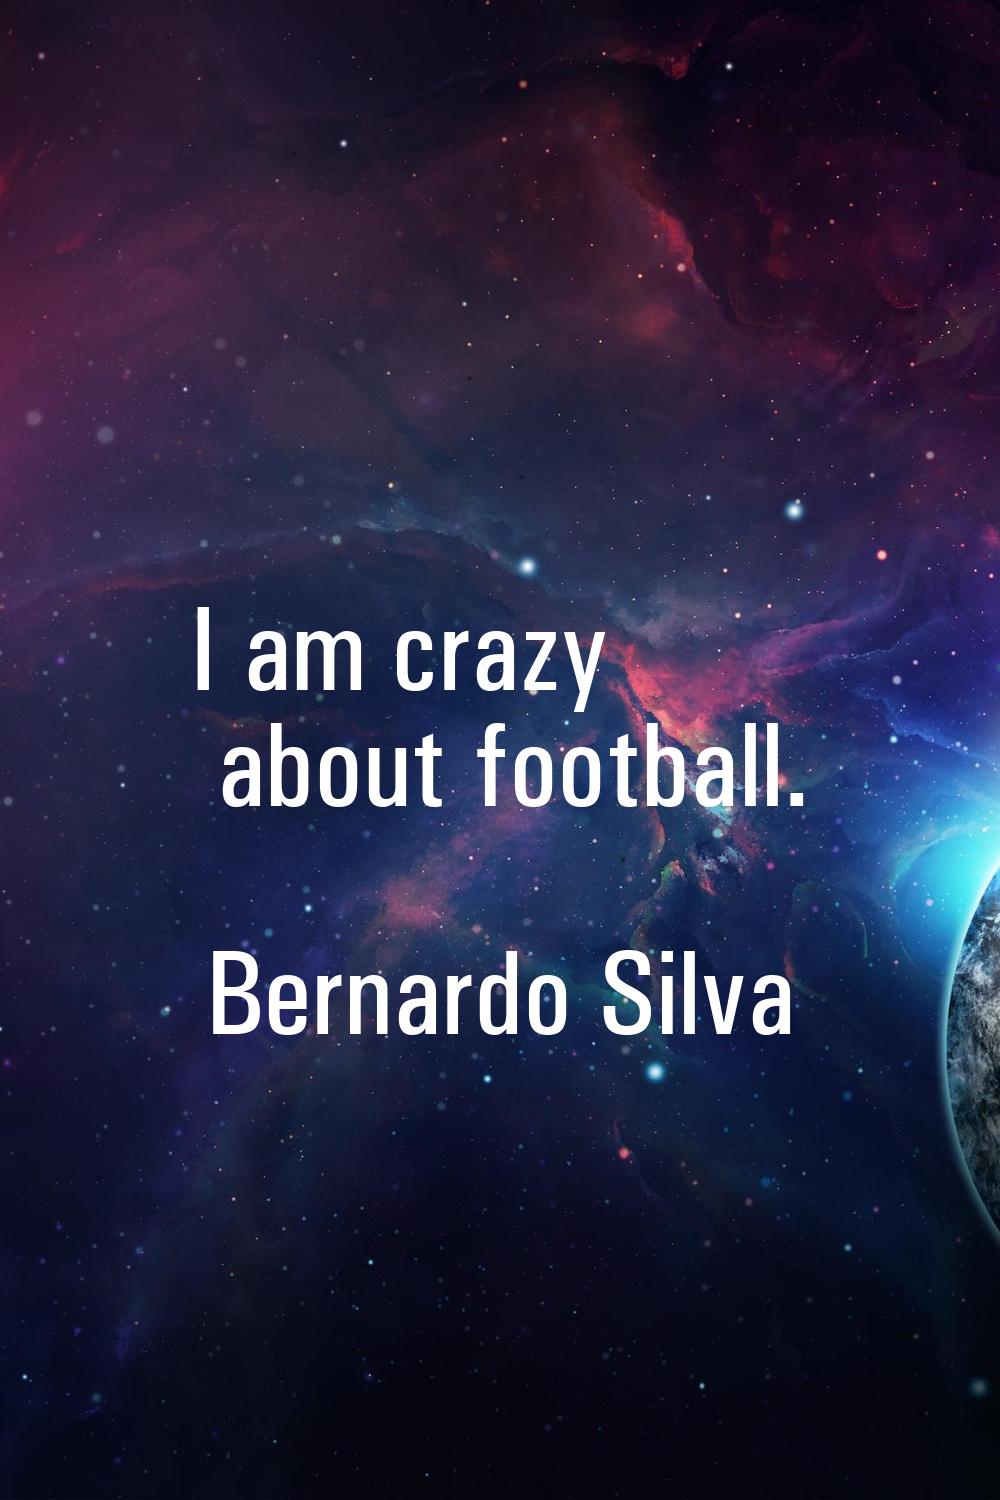 I am crazy about football.